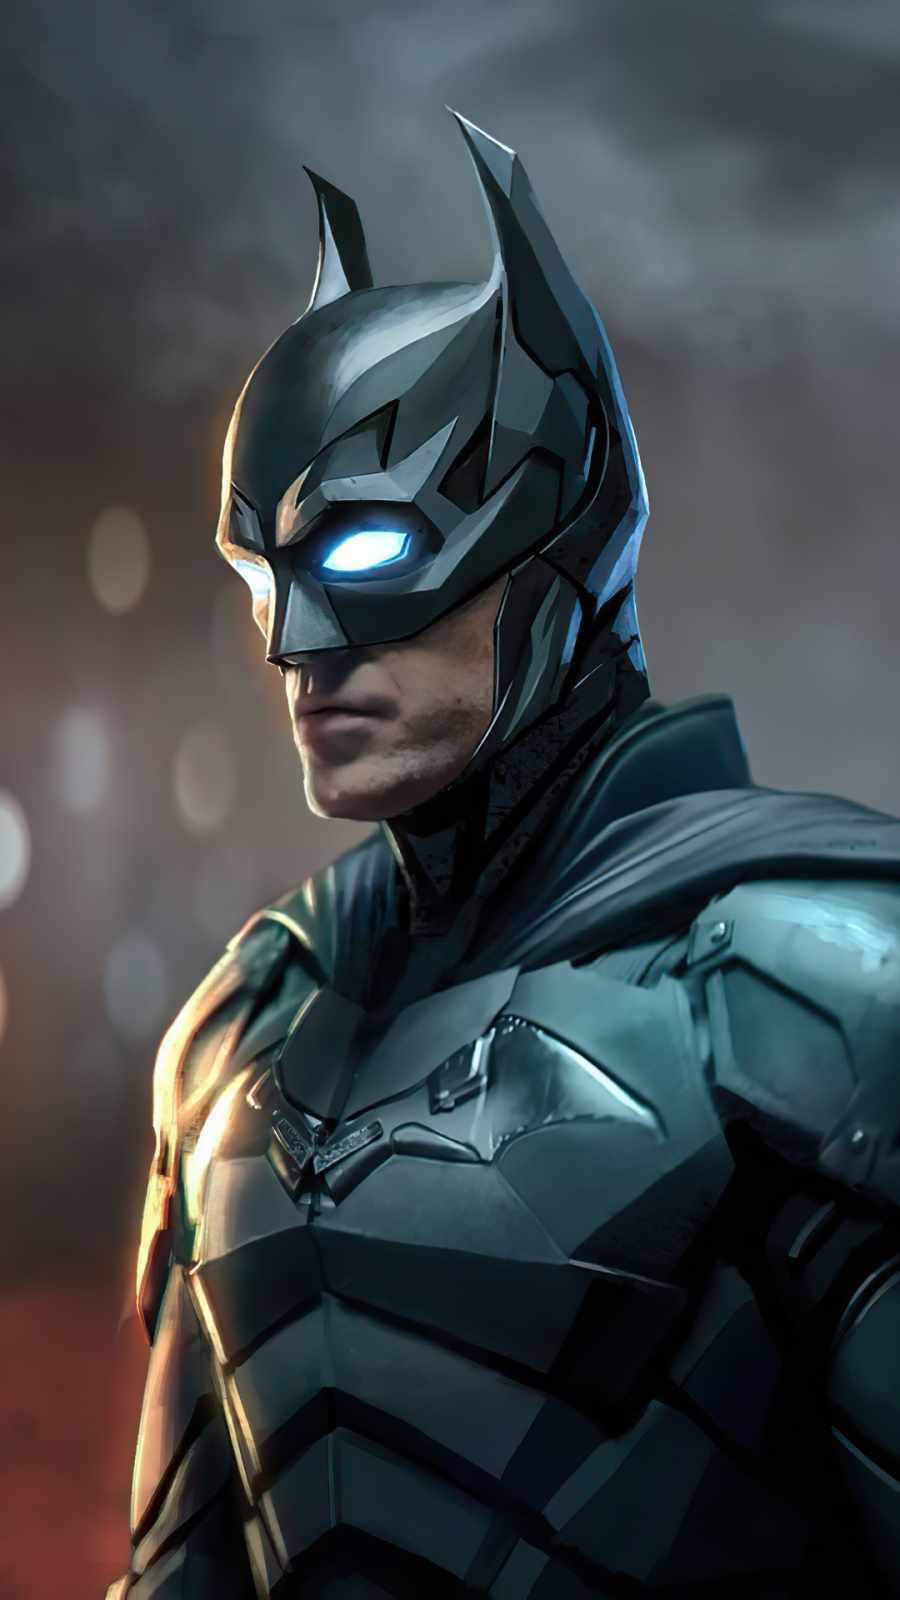 Download Galaxy S7 Edge Injustice Edition Stock Wallpapers  Android   Learn in 30 Sec from Microsoft Awarded MVP